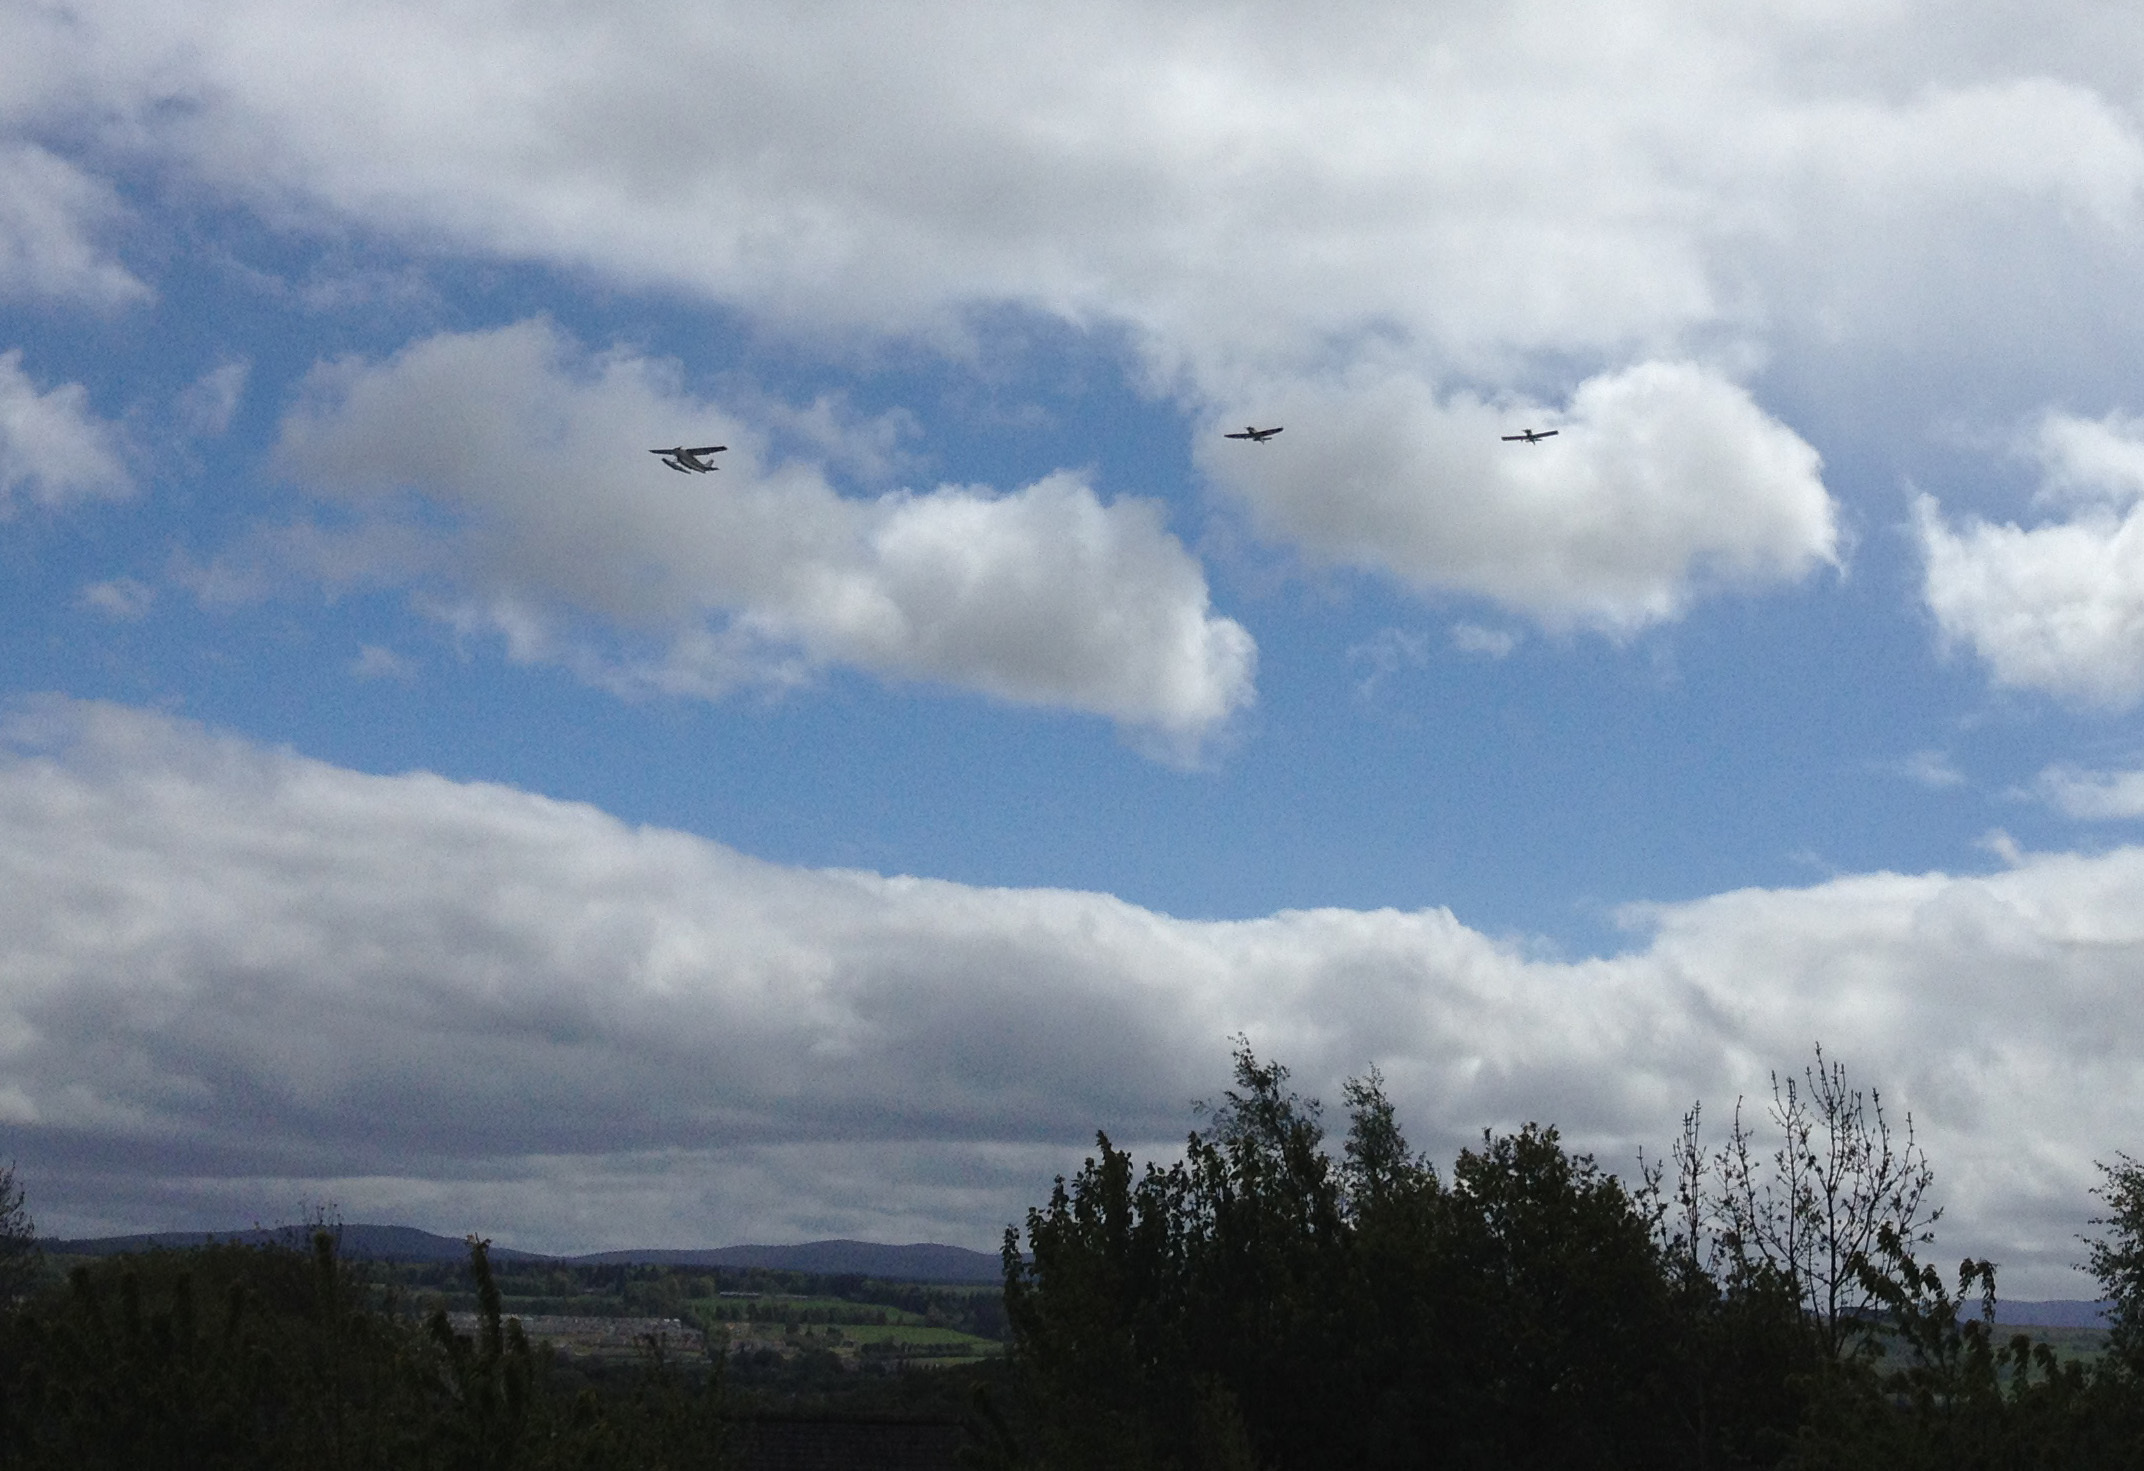 The three planes believed to have flown under the Kessock Bridge 